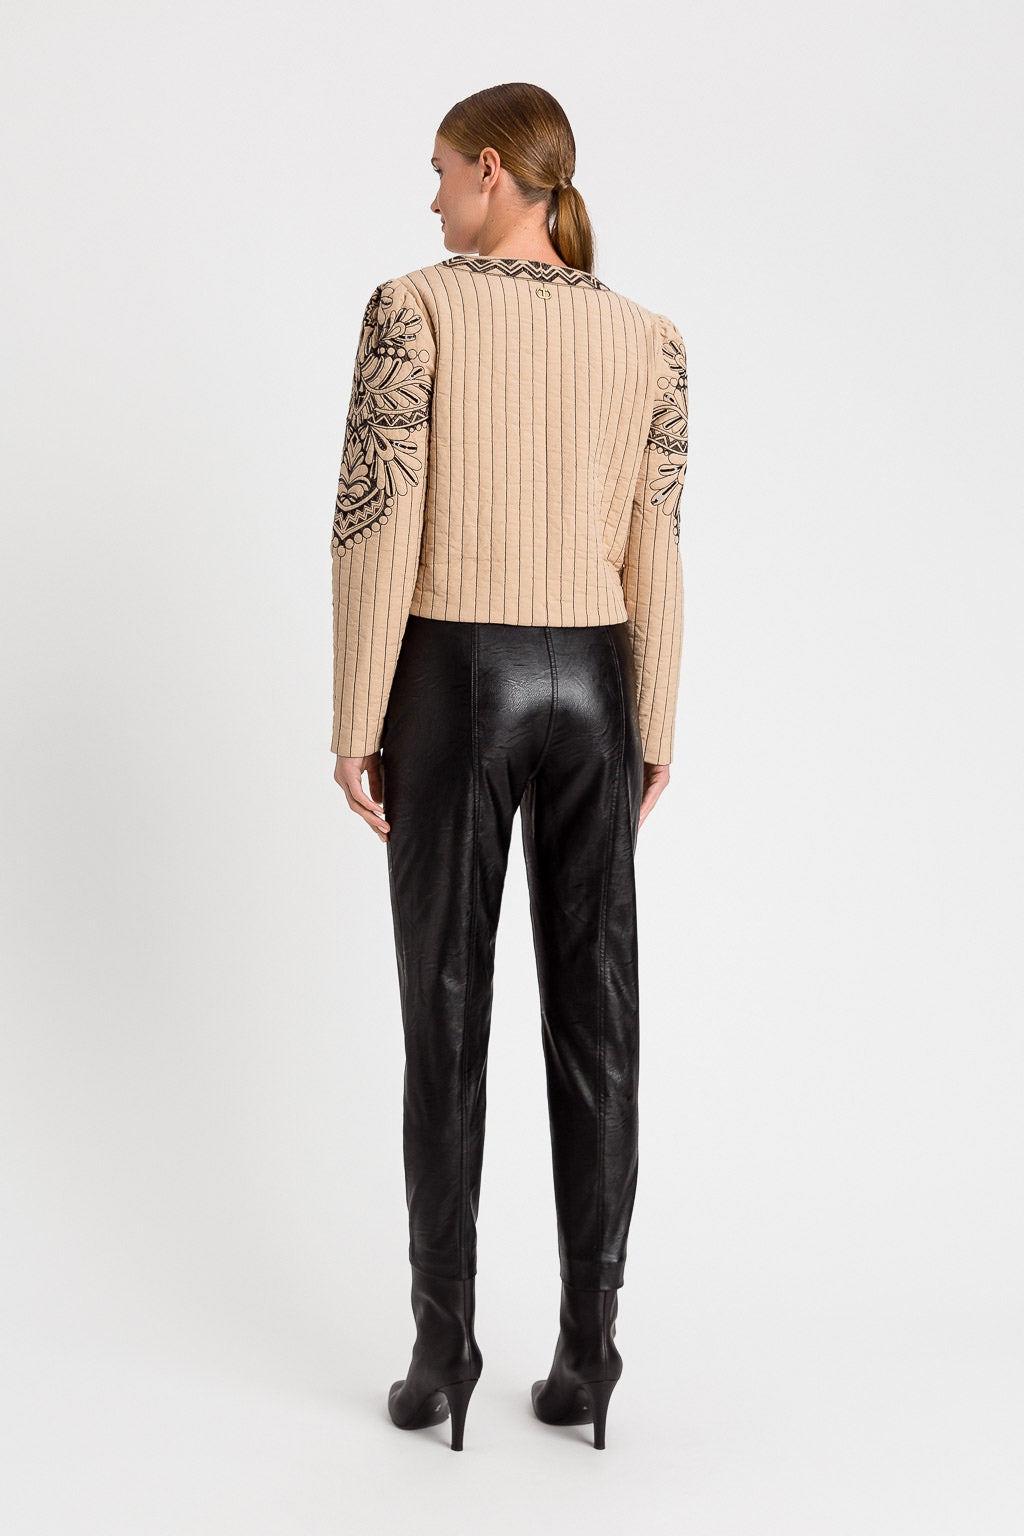 Twinset Black Leather Effect Trousers